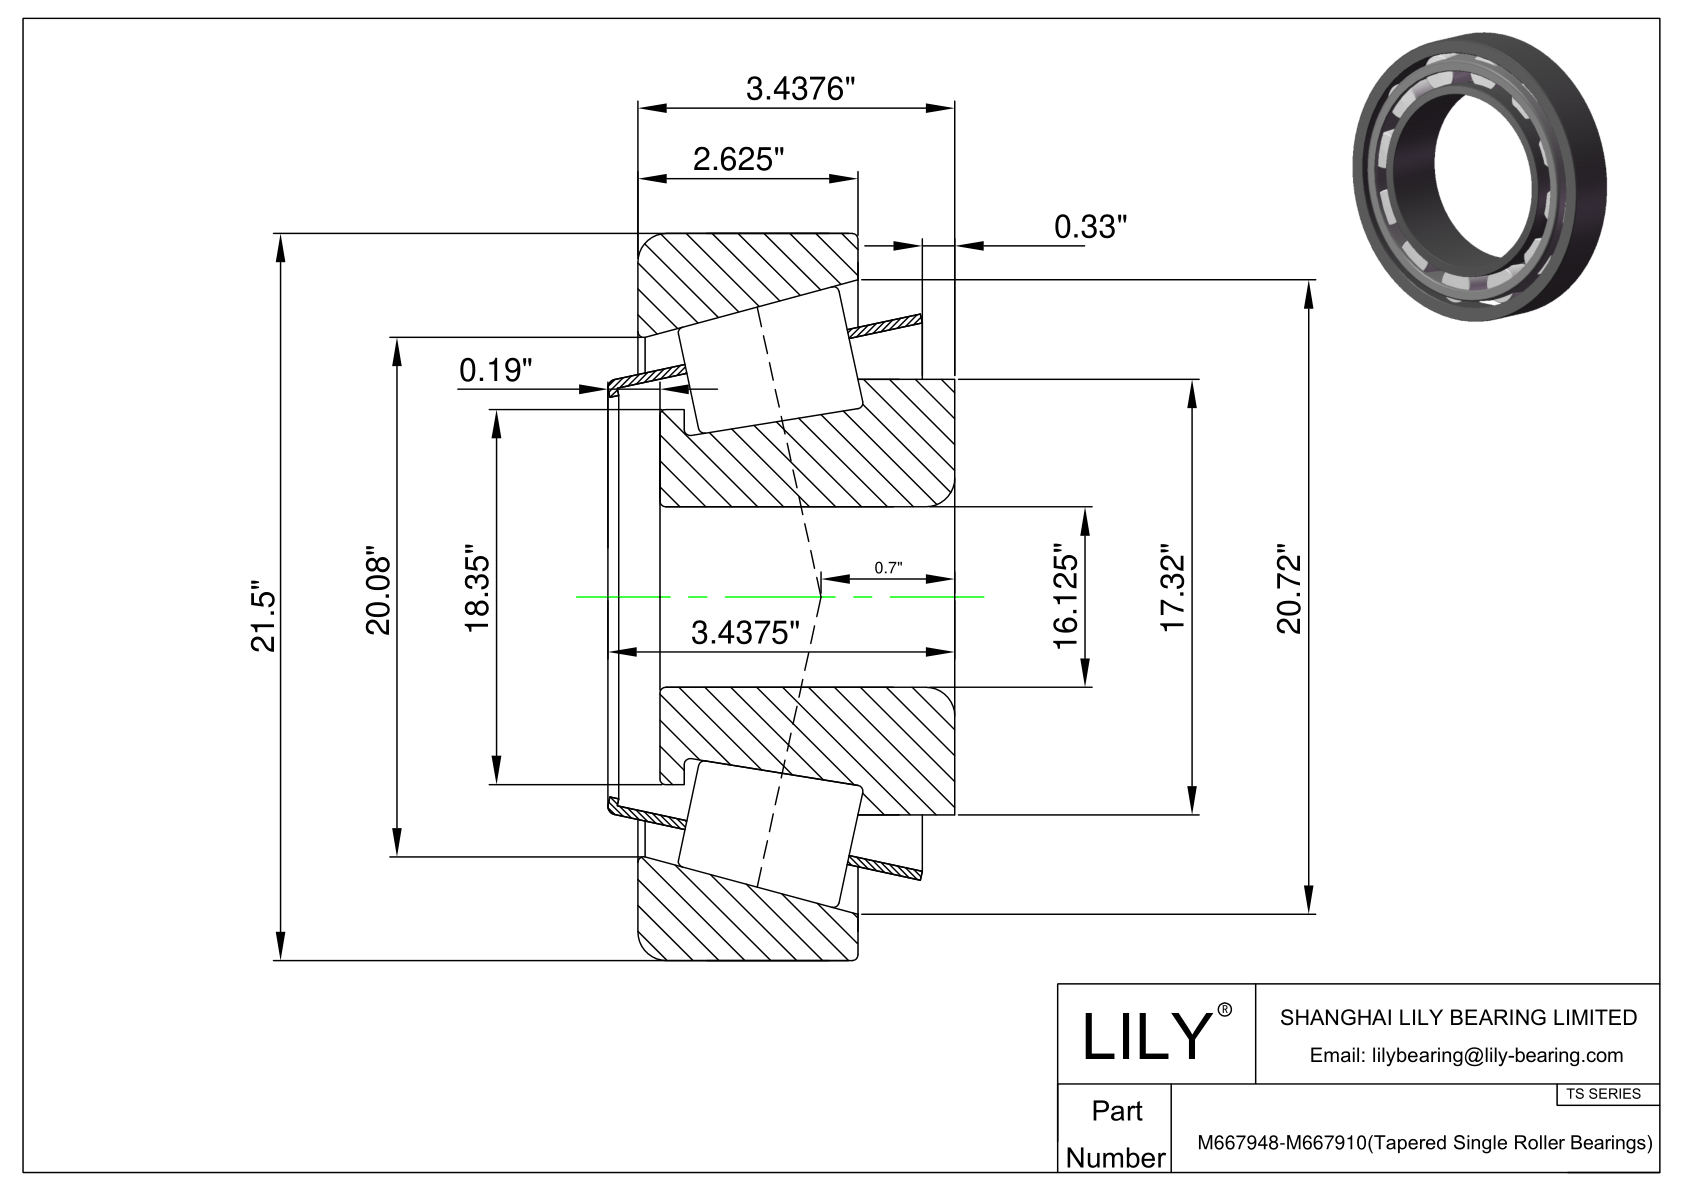 M667948-M667910 TS (Tapered Single Roller Bearings) (Imperial) cad drawing